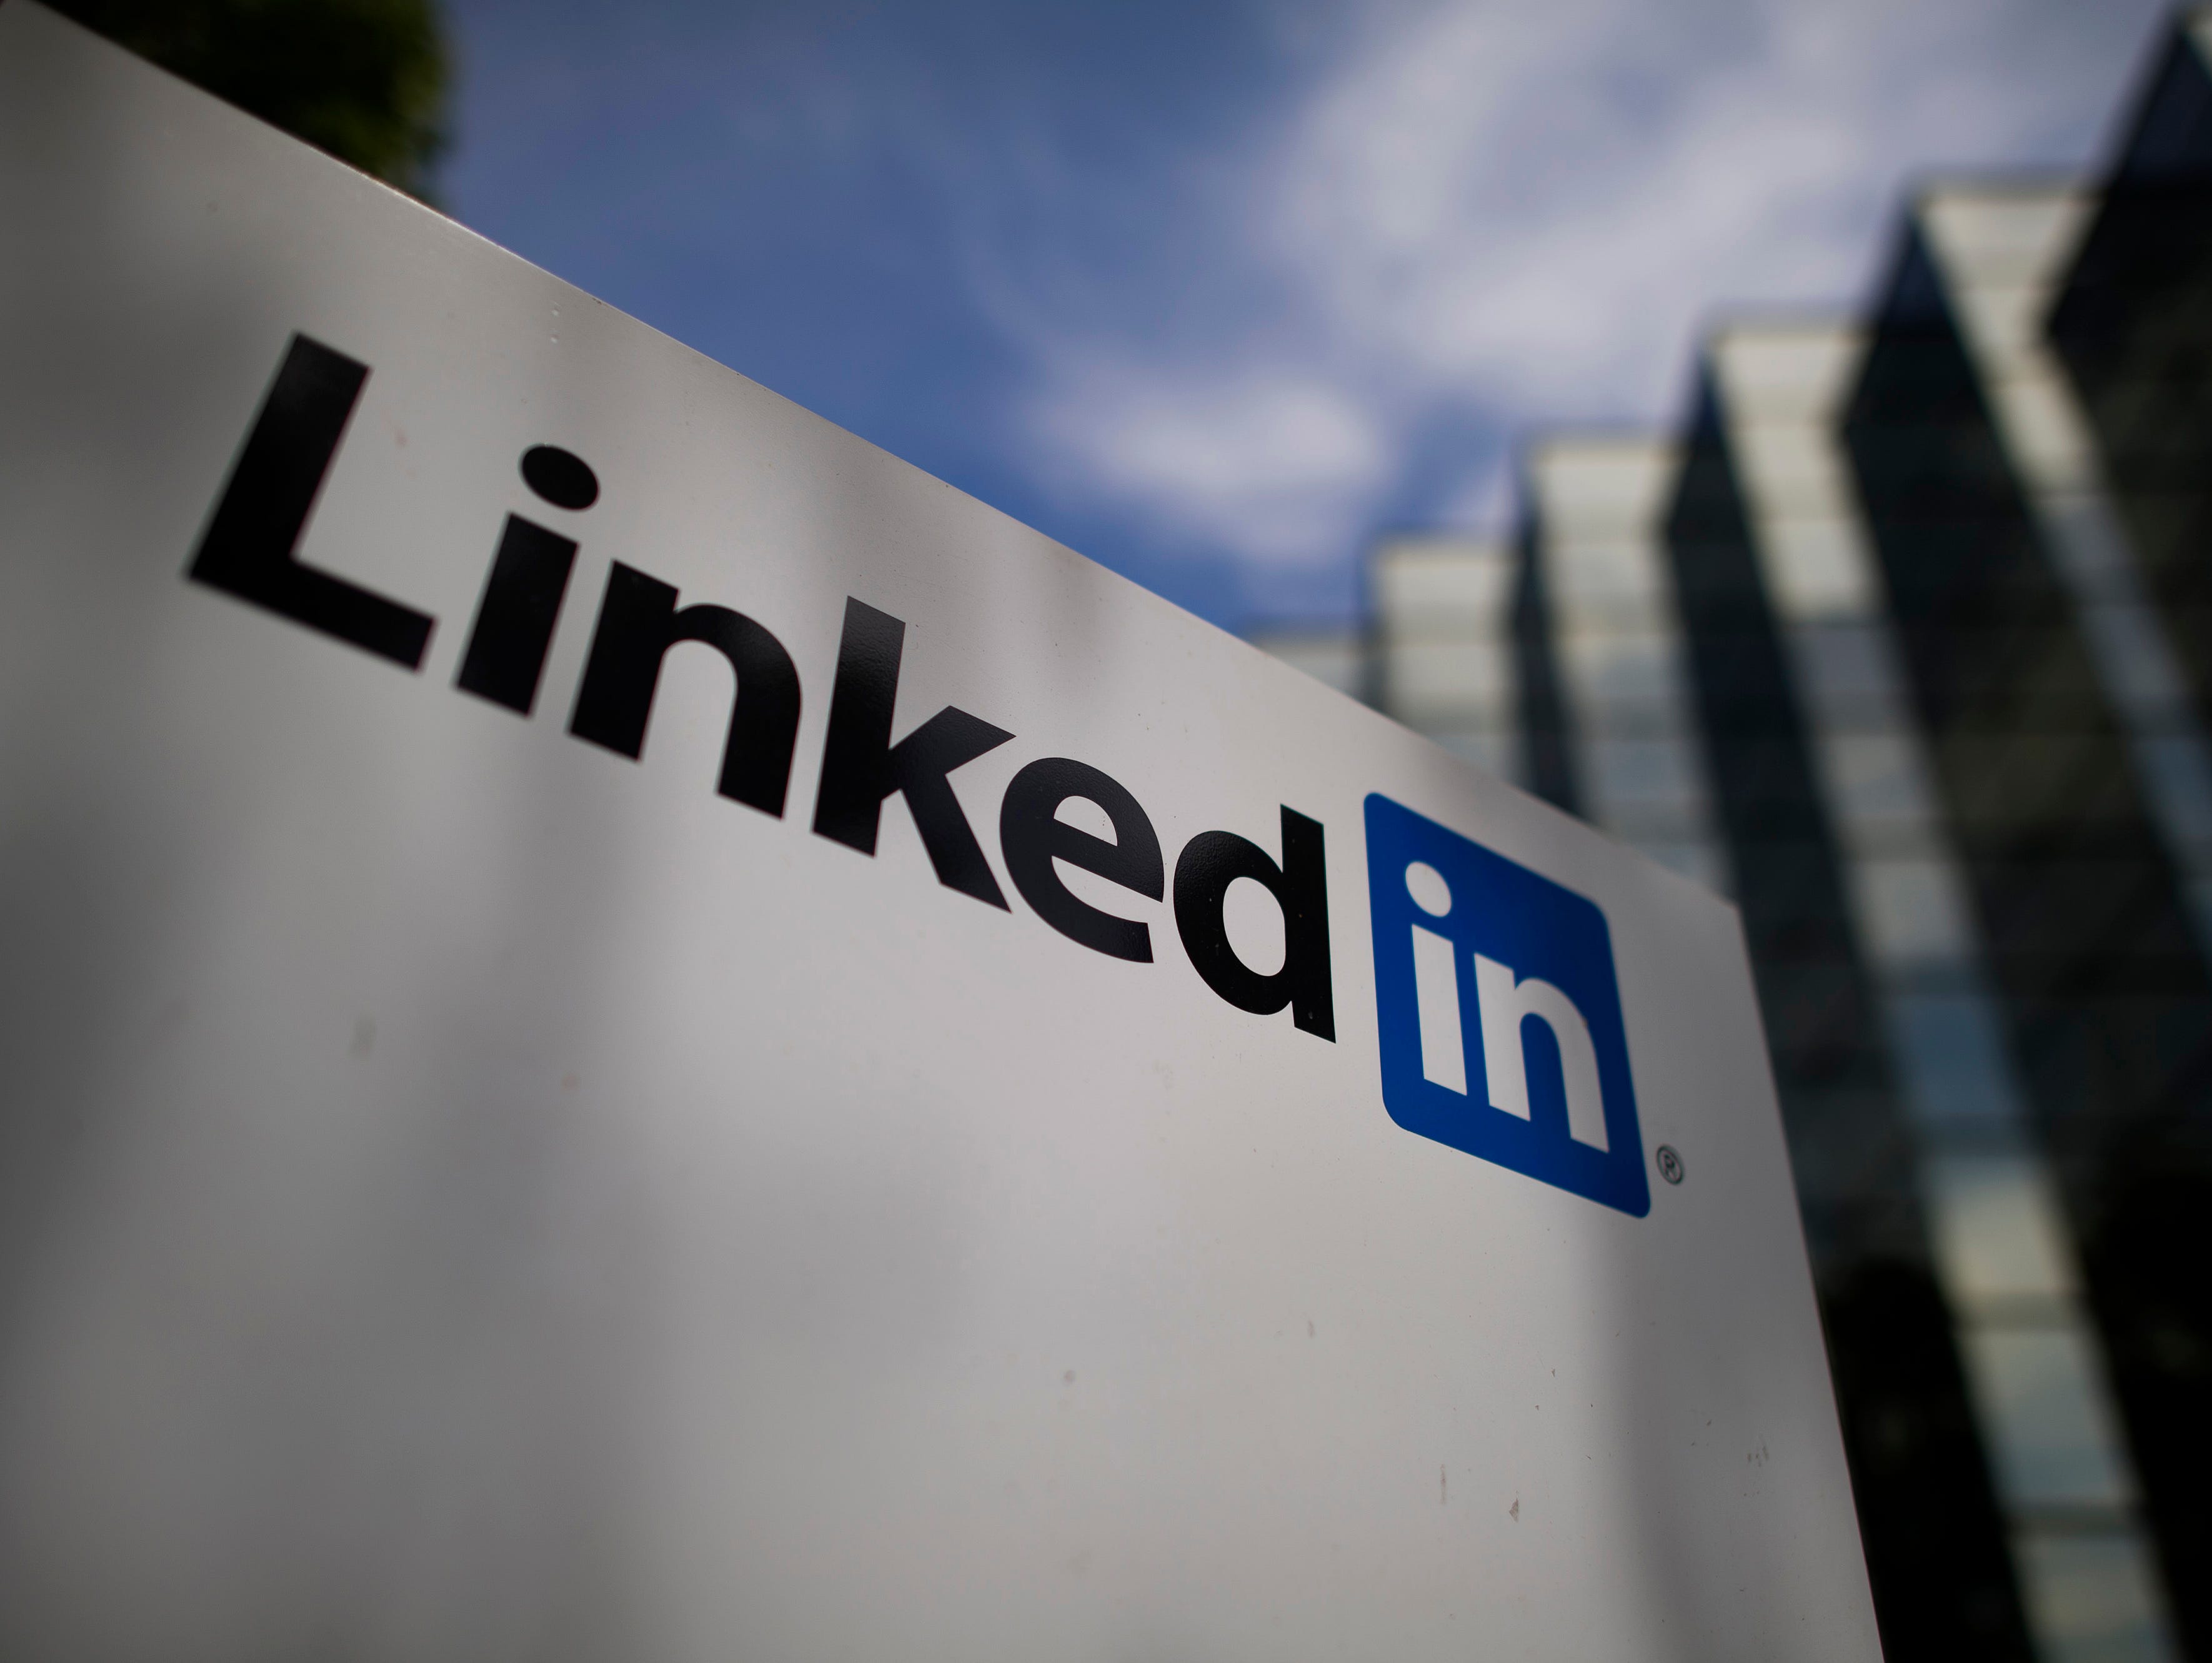 LinkedIn shares surged after results Thursday Oct. 29, 2015.